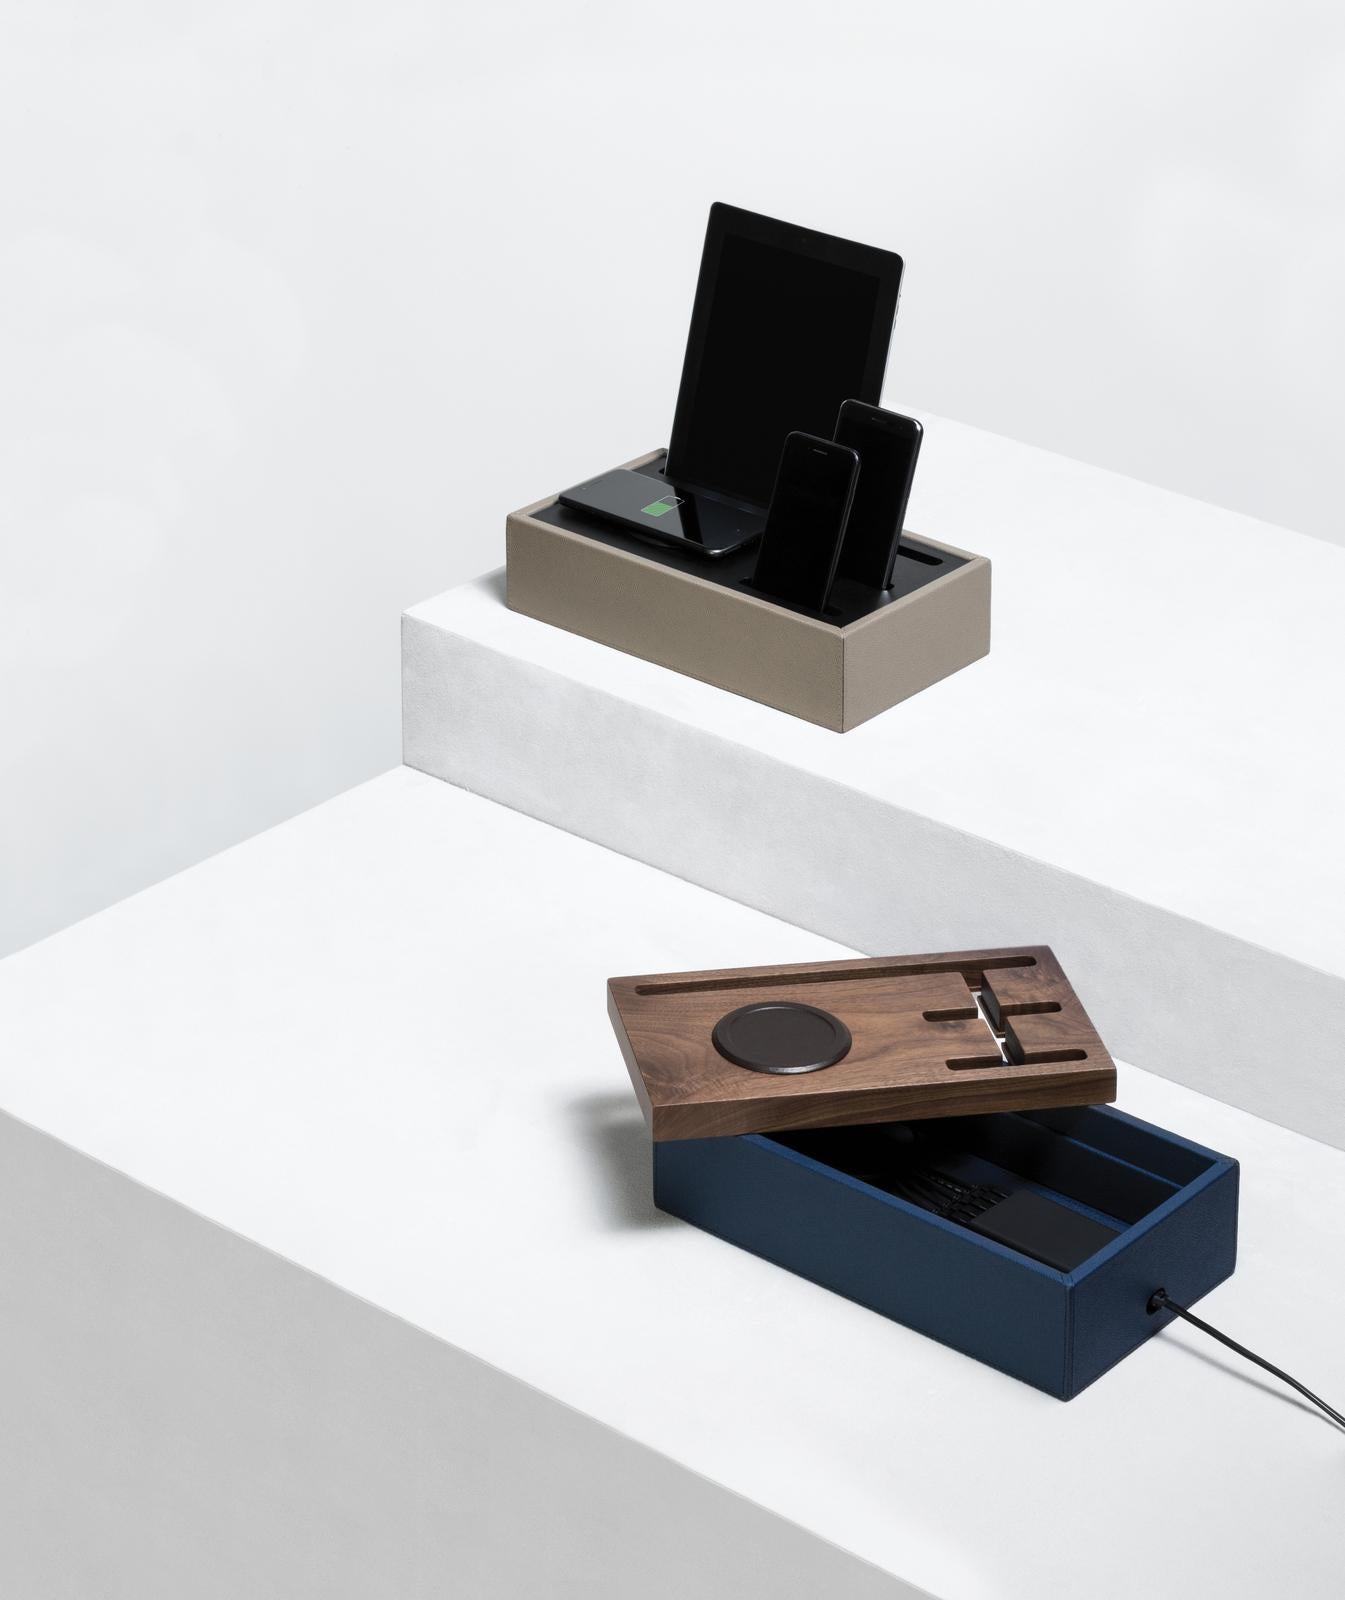 An indispensable accessory in a contemporary household, this charging station boasts refined details and elegant finishes, becoming not only useful but striking enough to display anywhere in the house. The box structure in wood hosts five USB ports